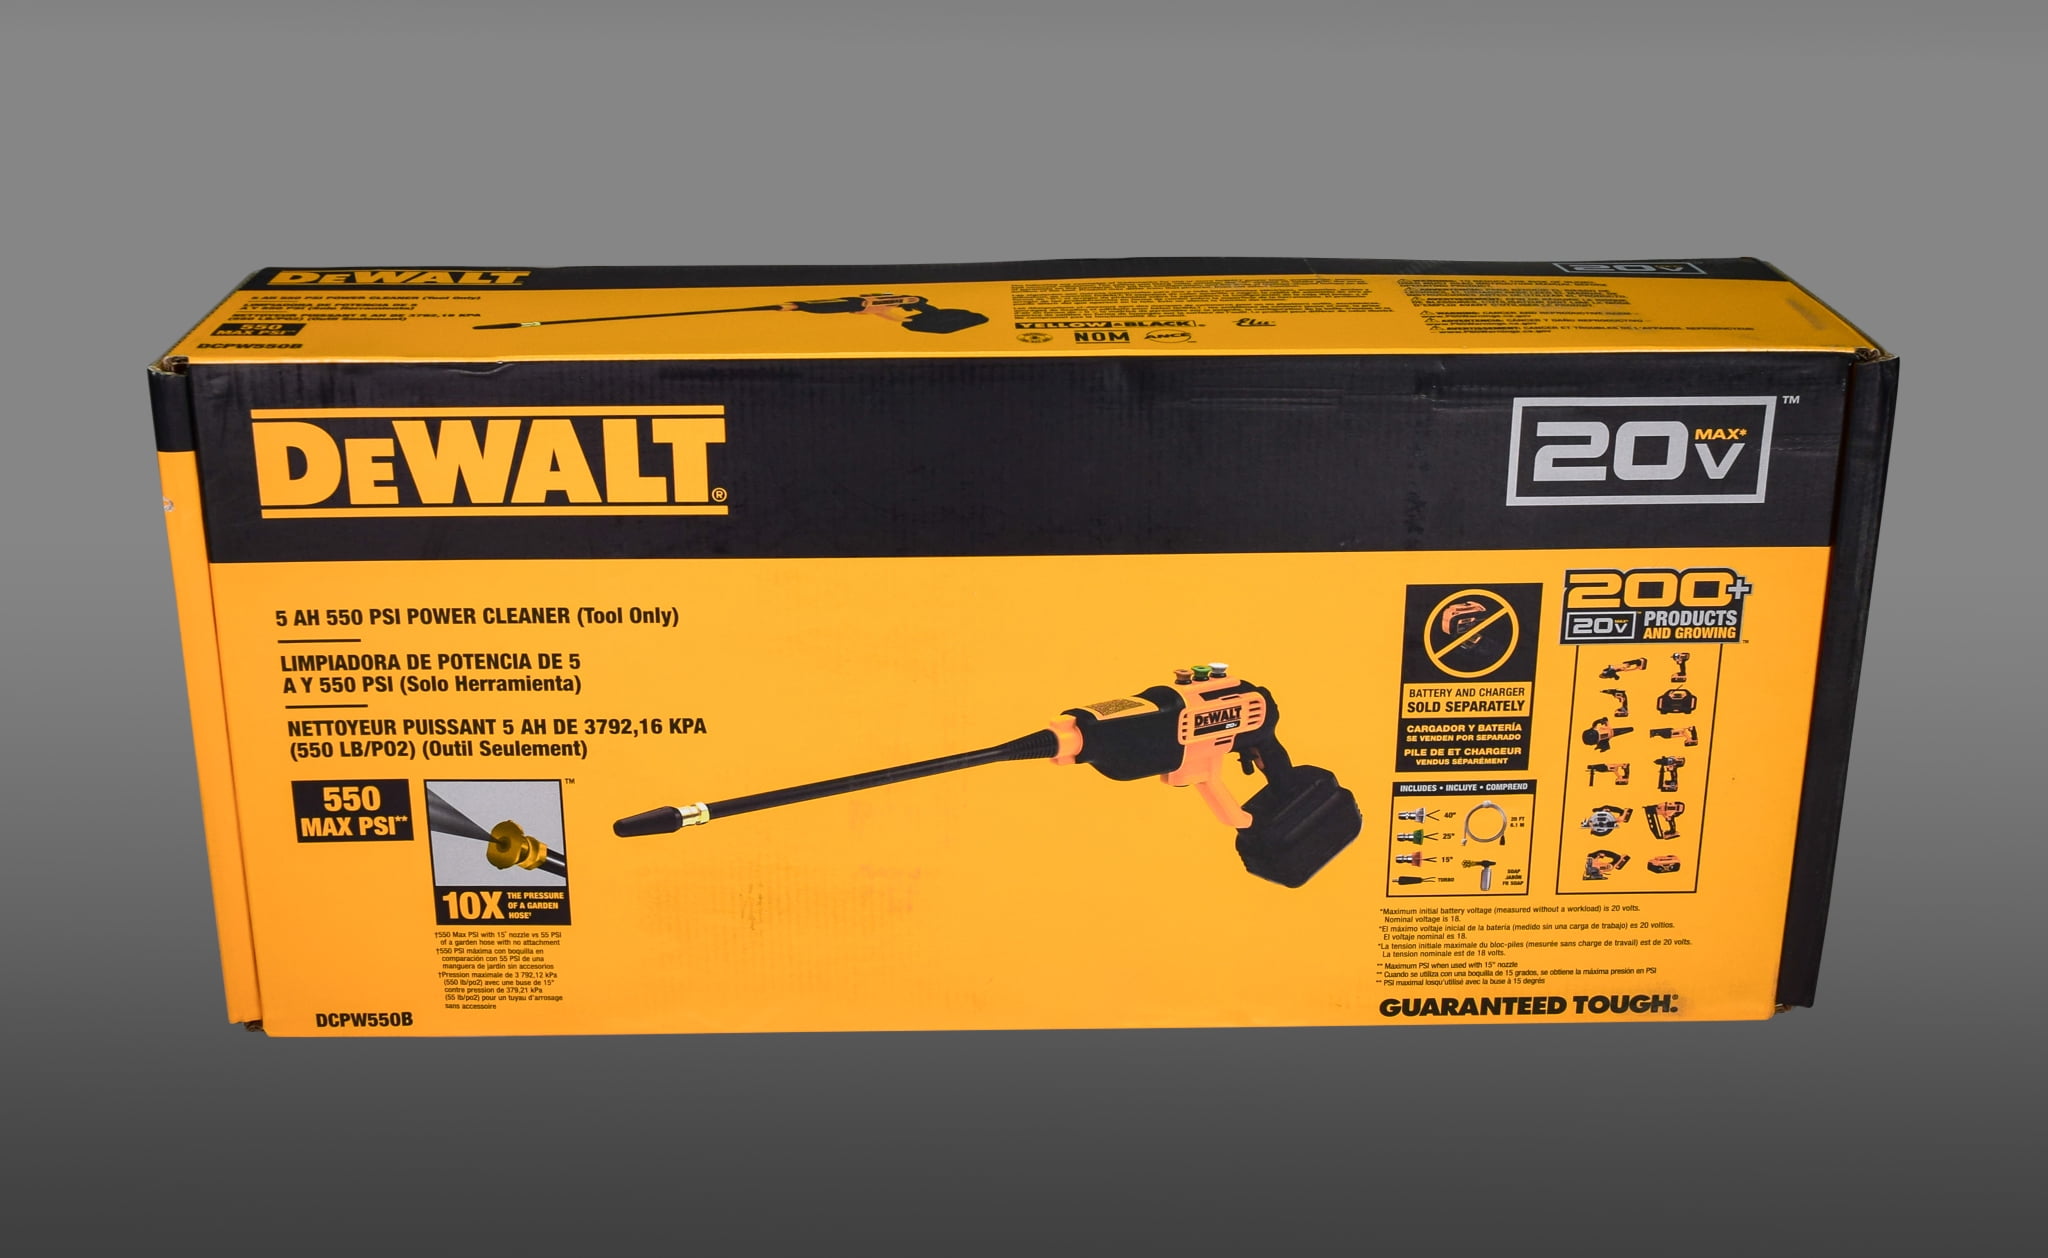 20V 550 PSI, 1 GPM Cordless Power Cleaner w/ 4 Nozzles Tool-Only DCPW550B - Walmart.com